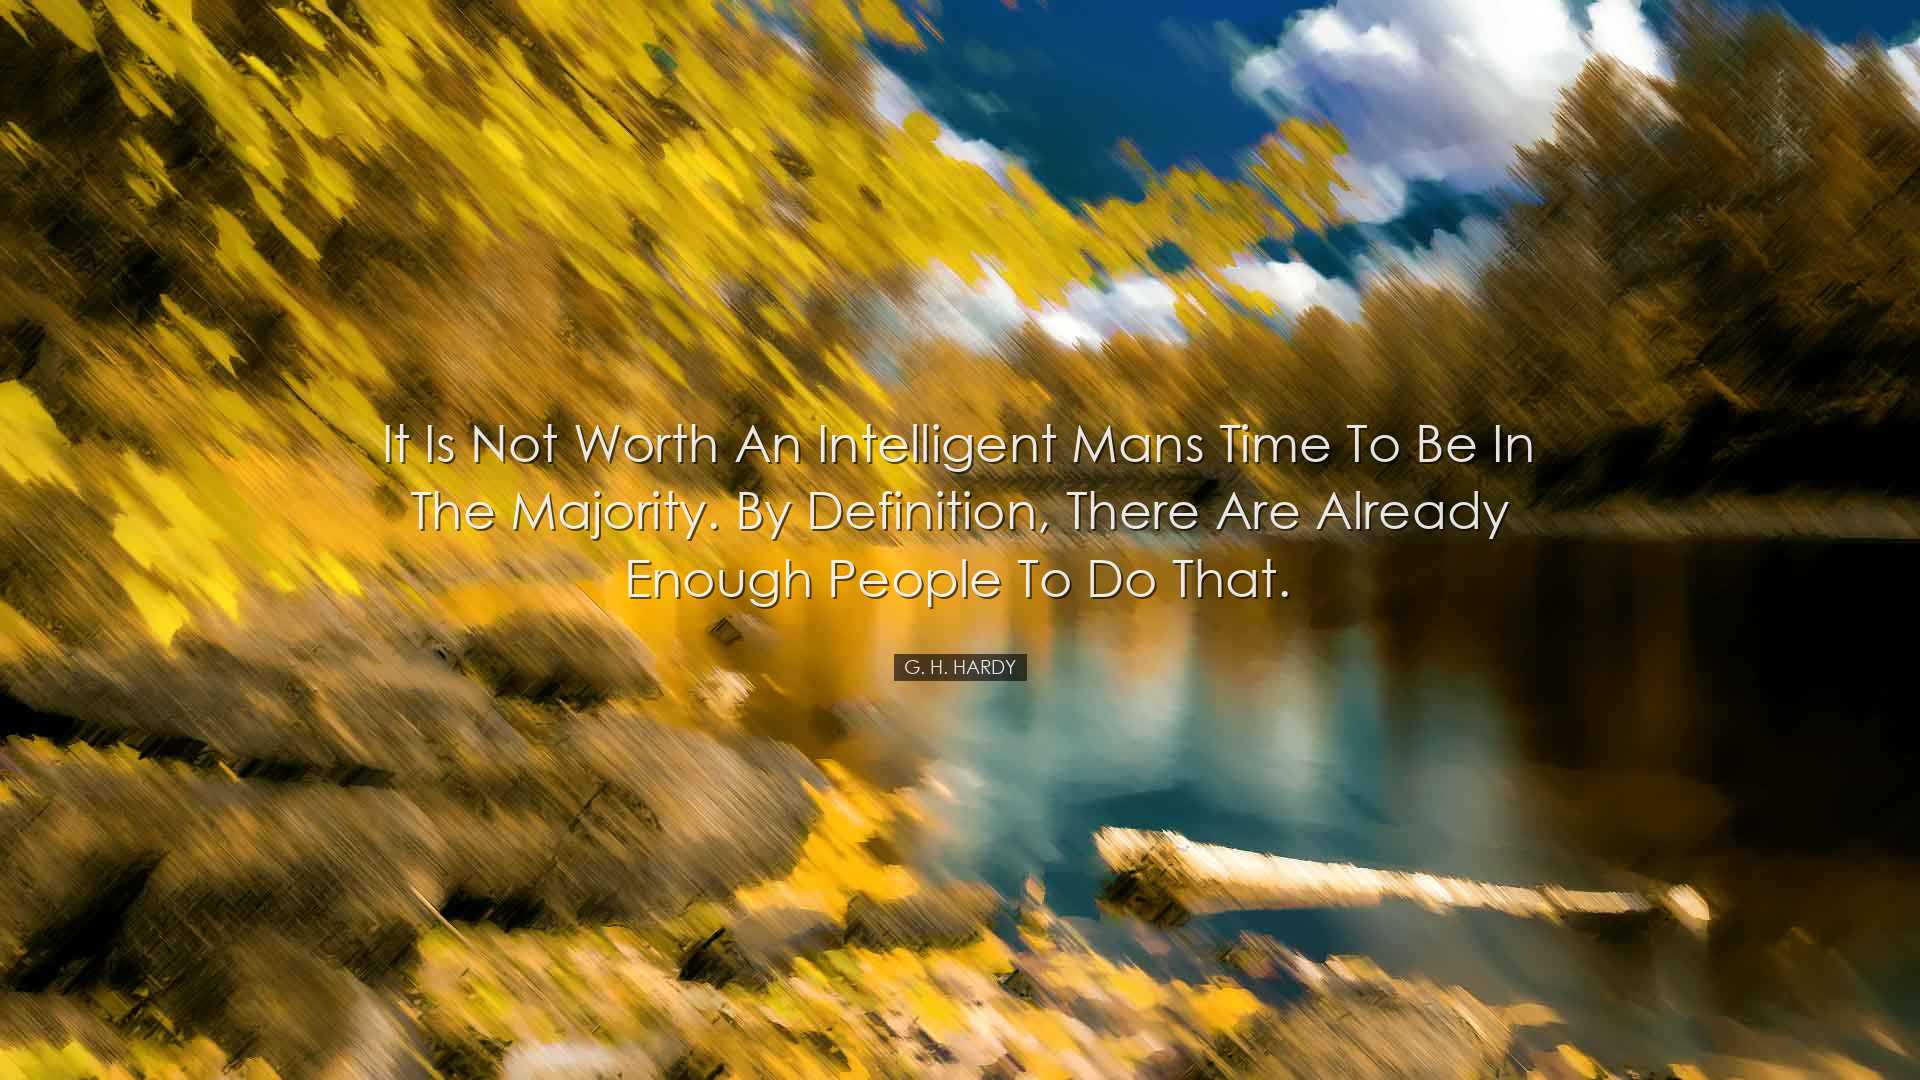 It is not worth an intelligent mans time to be in the majority. By